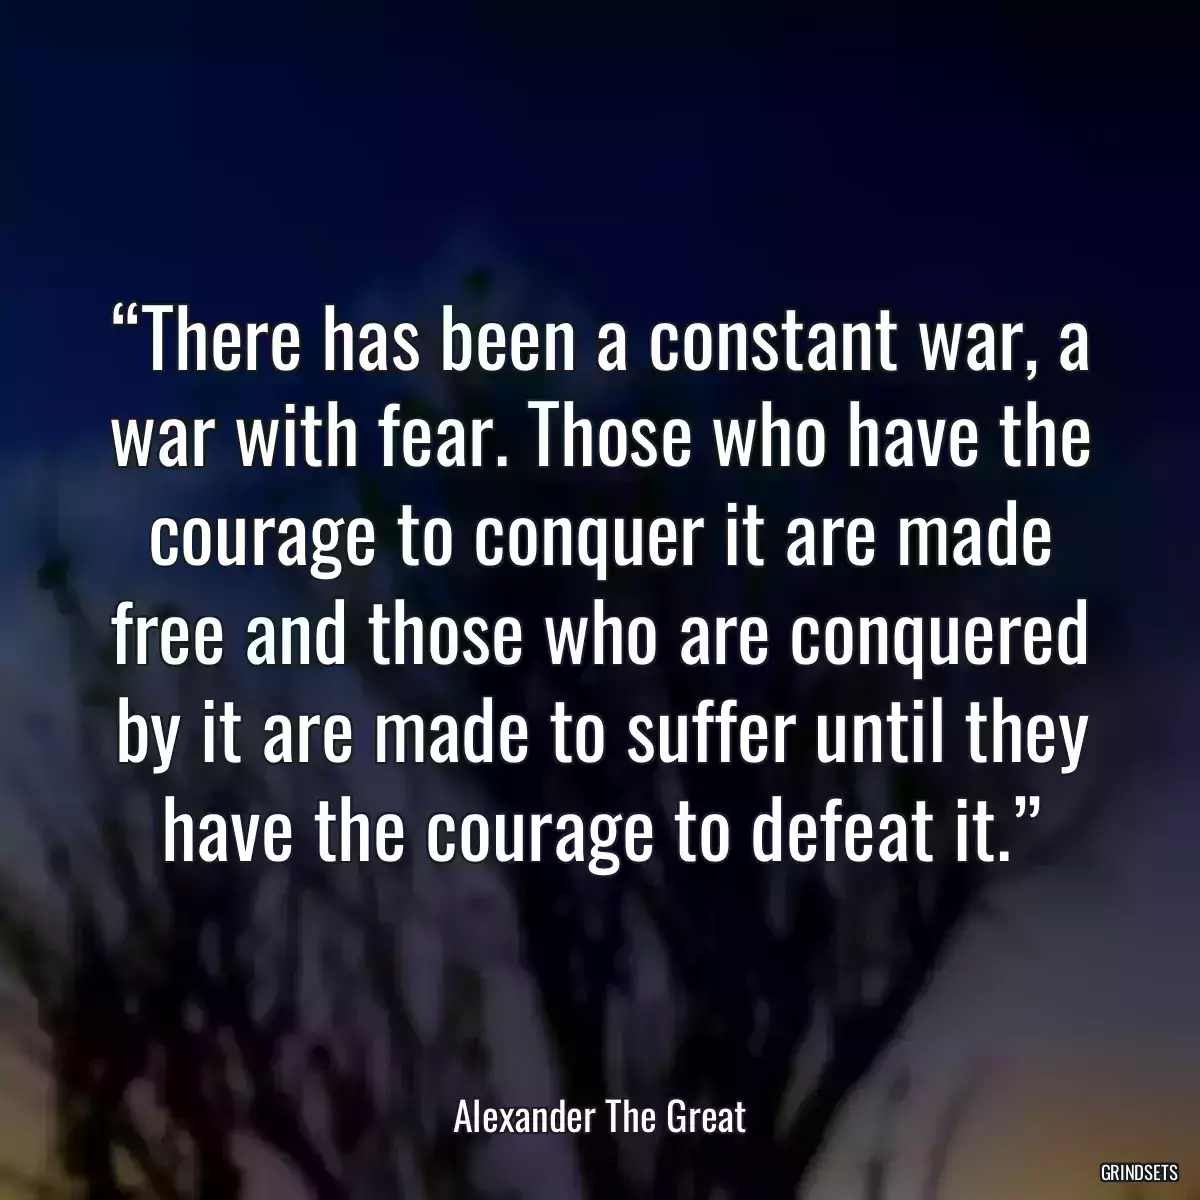 “There has been a constant war, a war with fear. Those who have the courage to conquer it are made free and those who are conquered by it are made to suffer until they have the courage to defeat it.”